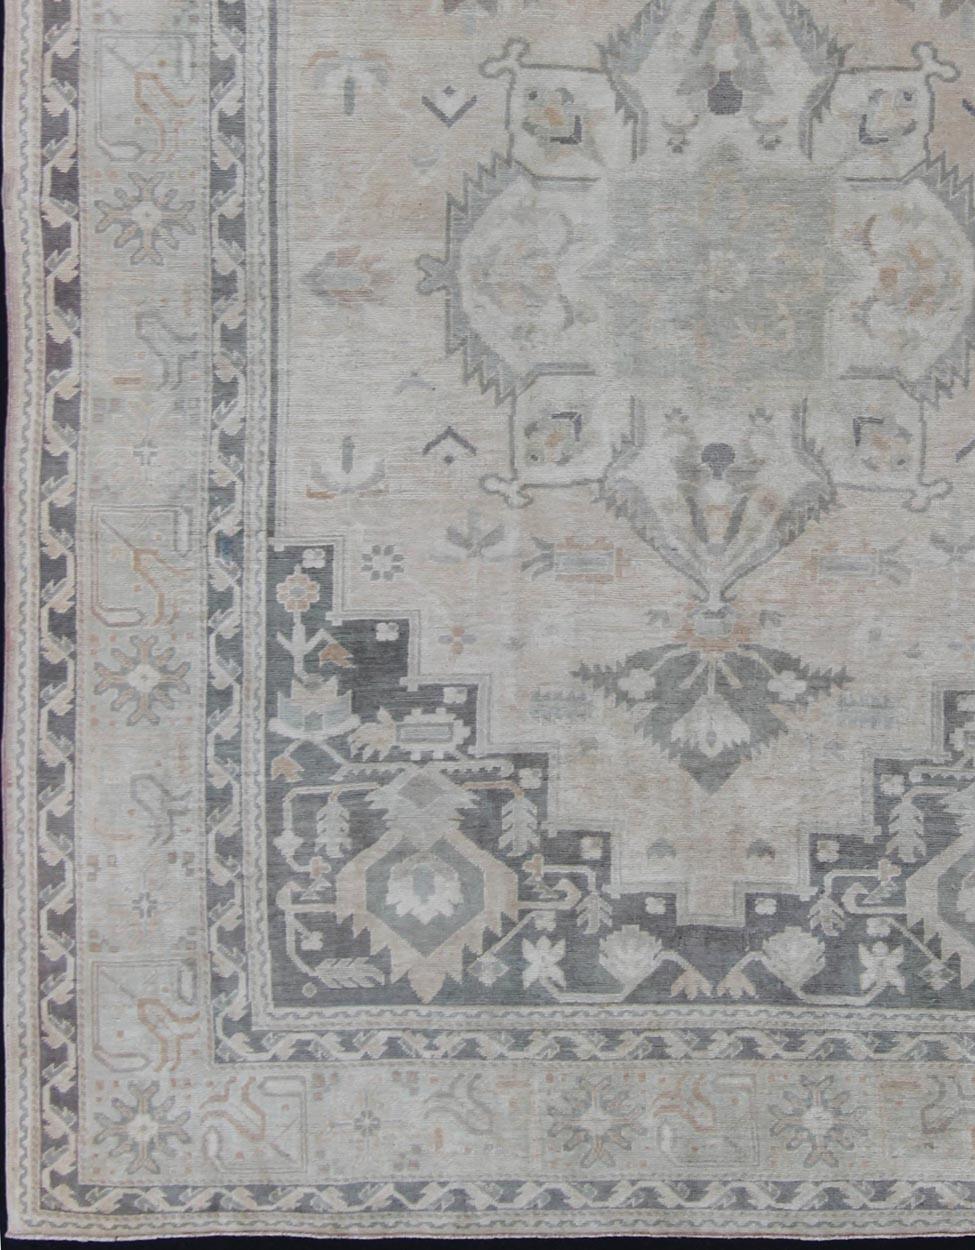 Light and mid-toned neutrals vintage Oushak carpet in grays and soft colors, rug en-115259, country of origin / type: Turkey / Oushak, circa 1940

This vintage midcentury Turkish Oushak displays a sub-geometric medallion in its center, with